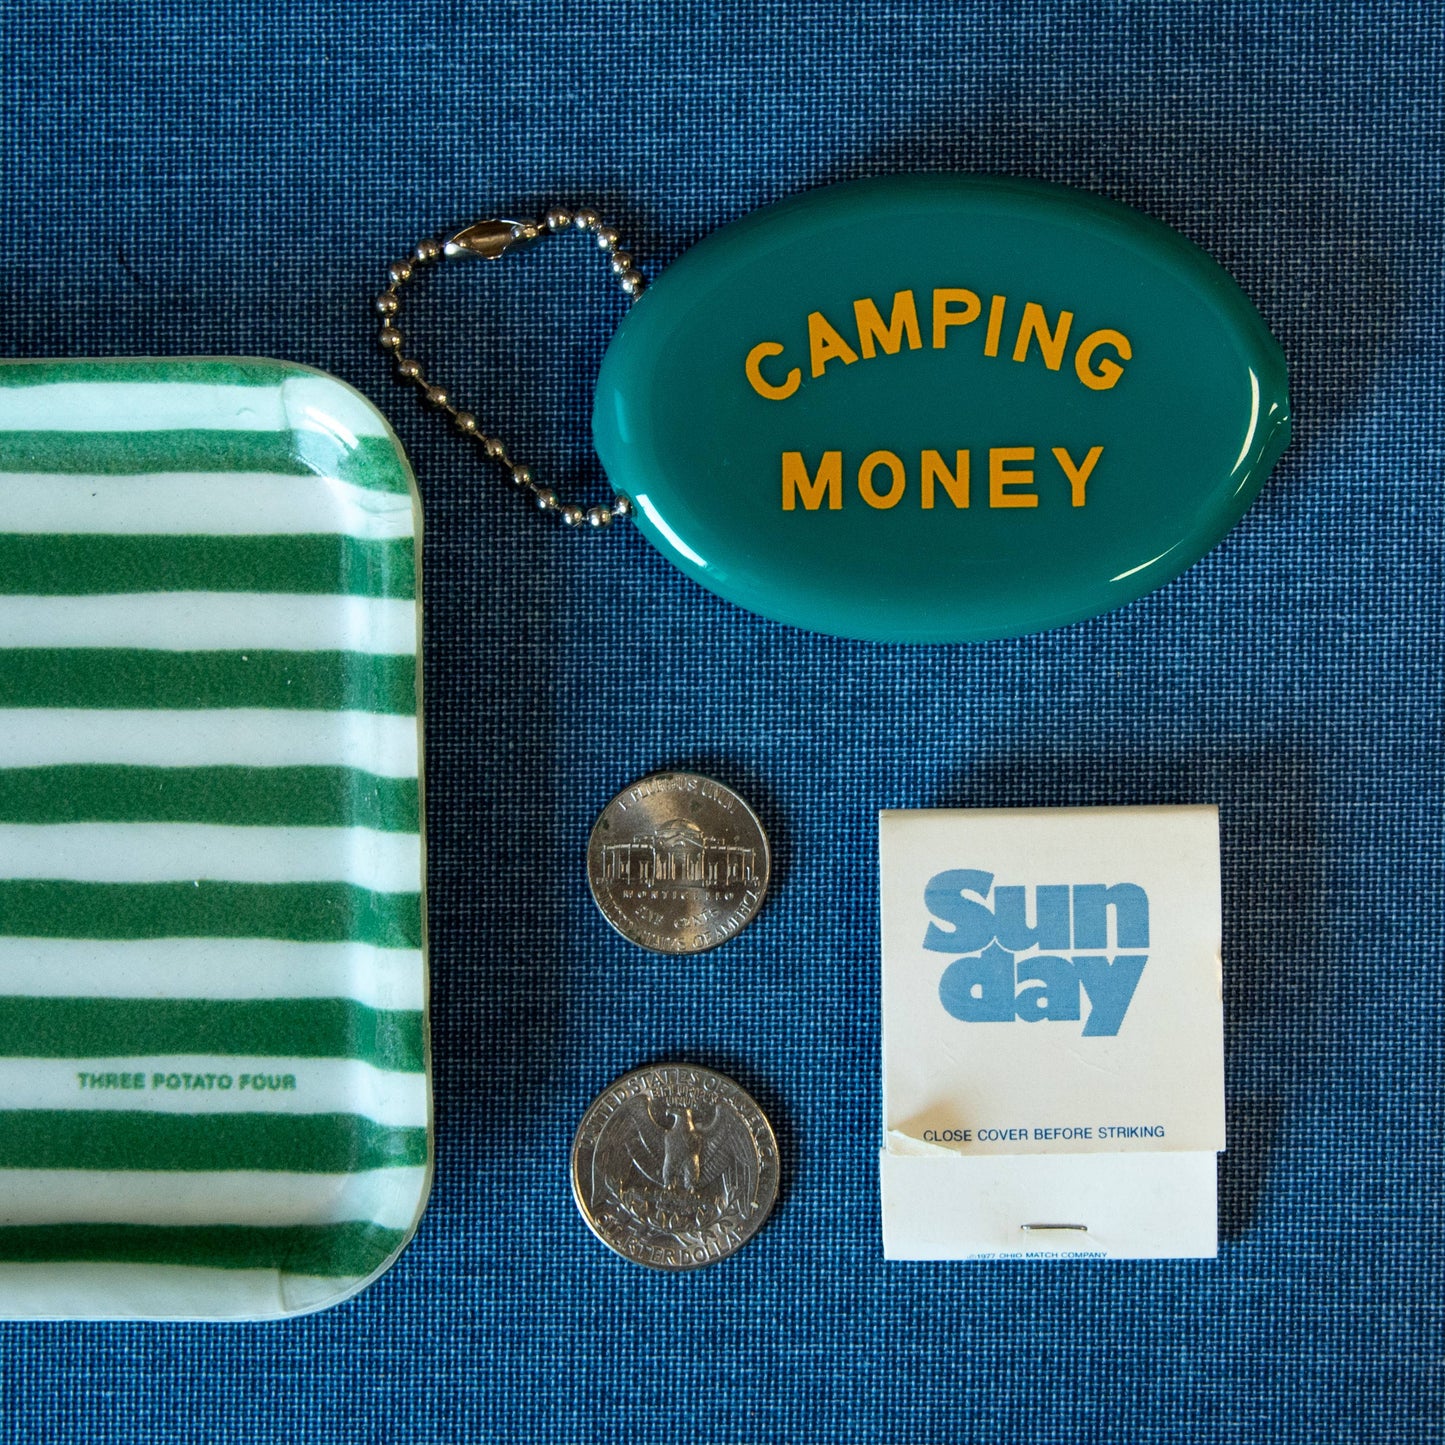 Camping Money Coin Pouch Keychain